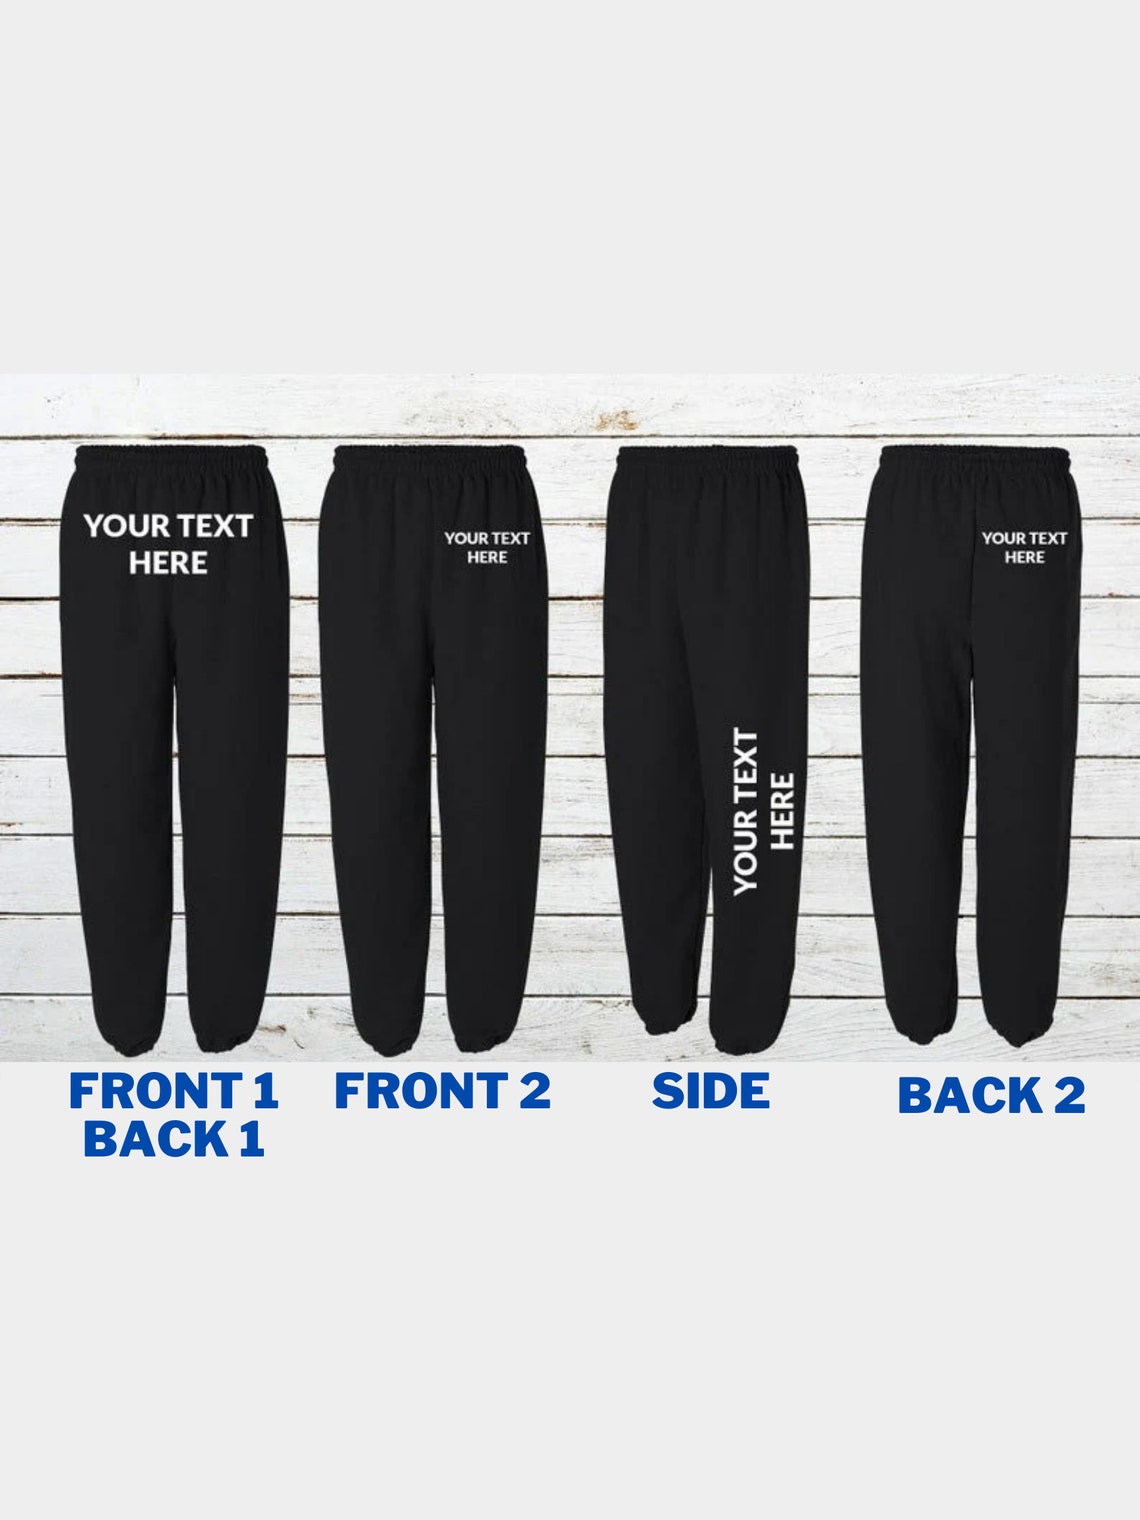 Additional Placements for Custom Sweatpants can Not Be - Etsy